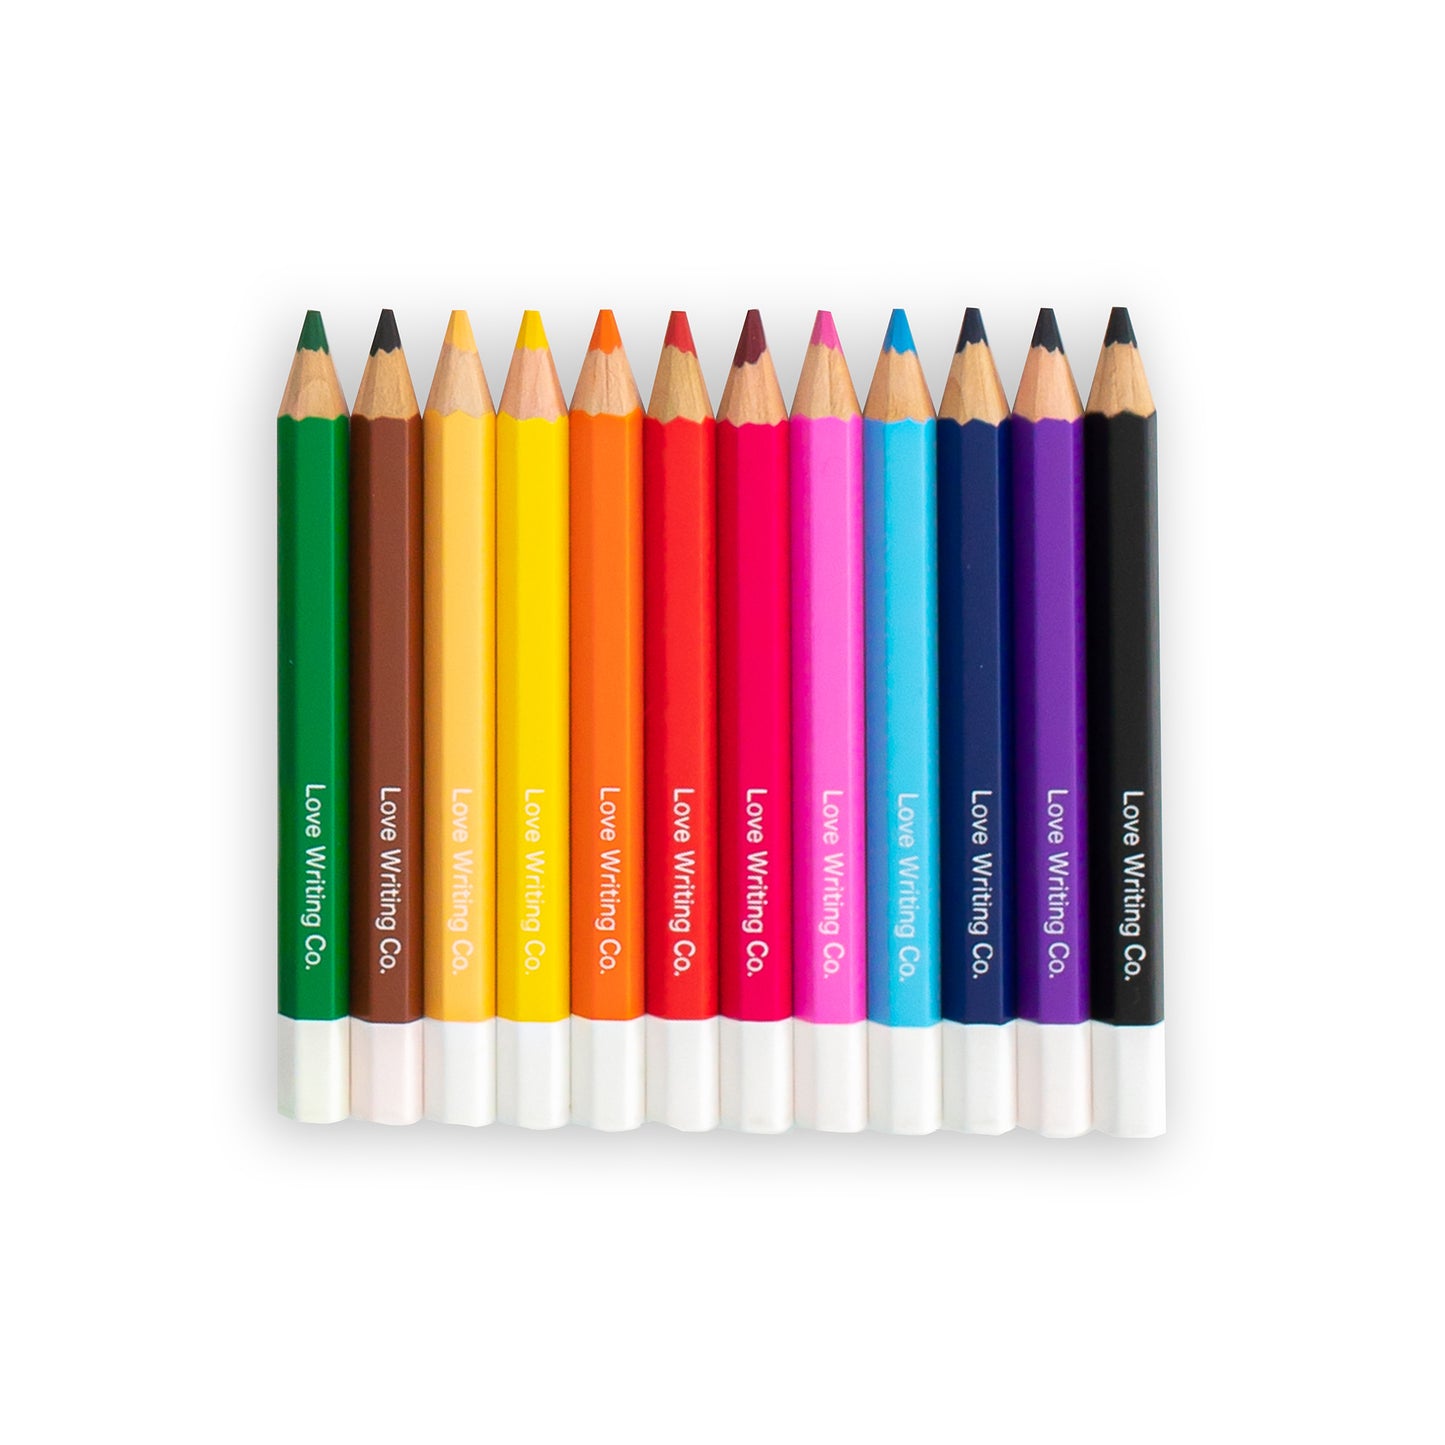 Erasable colouring pencils for writing kids stationery online